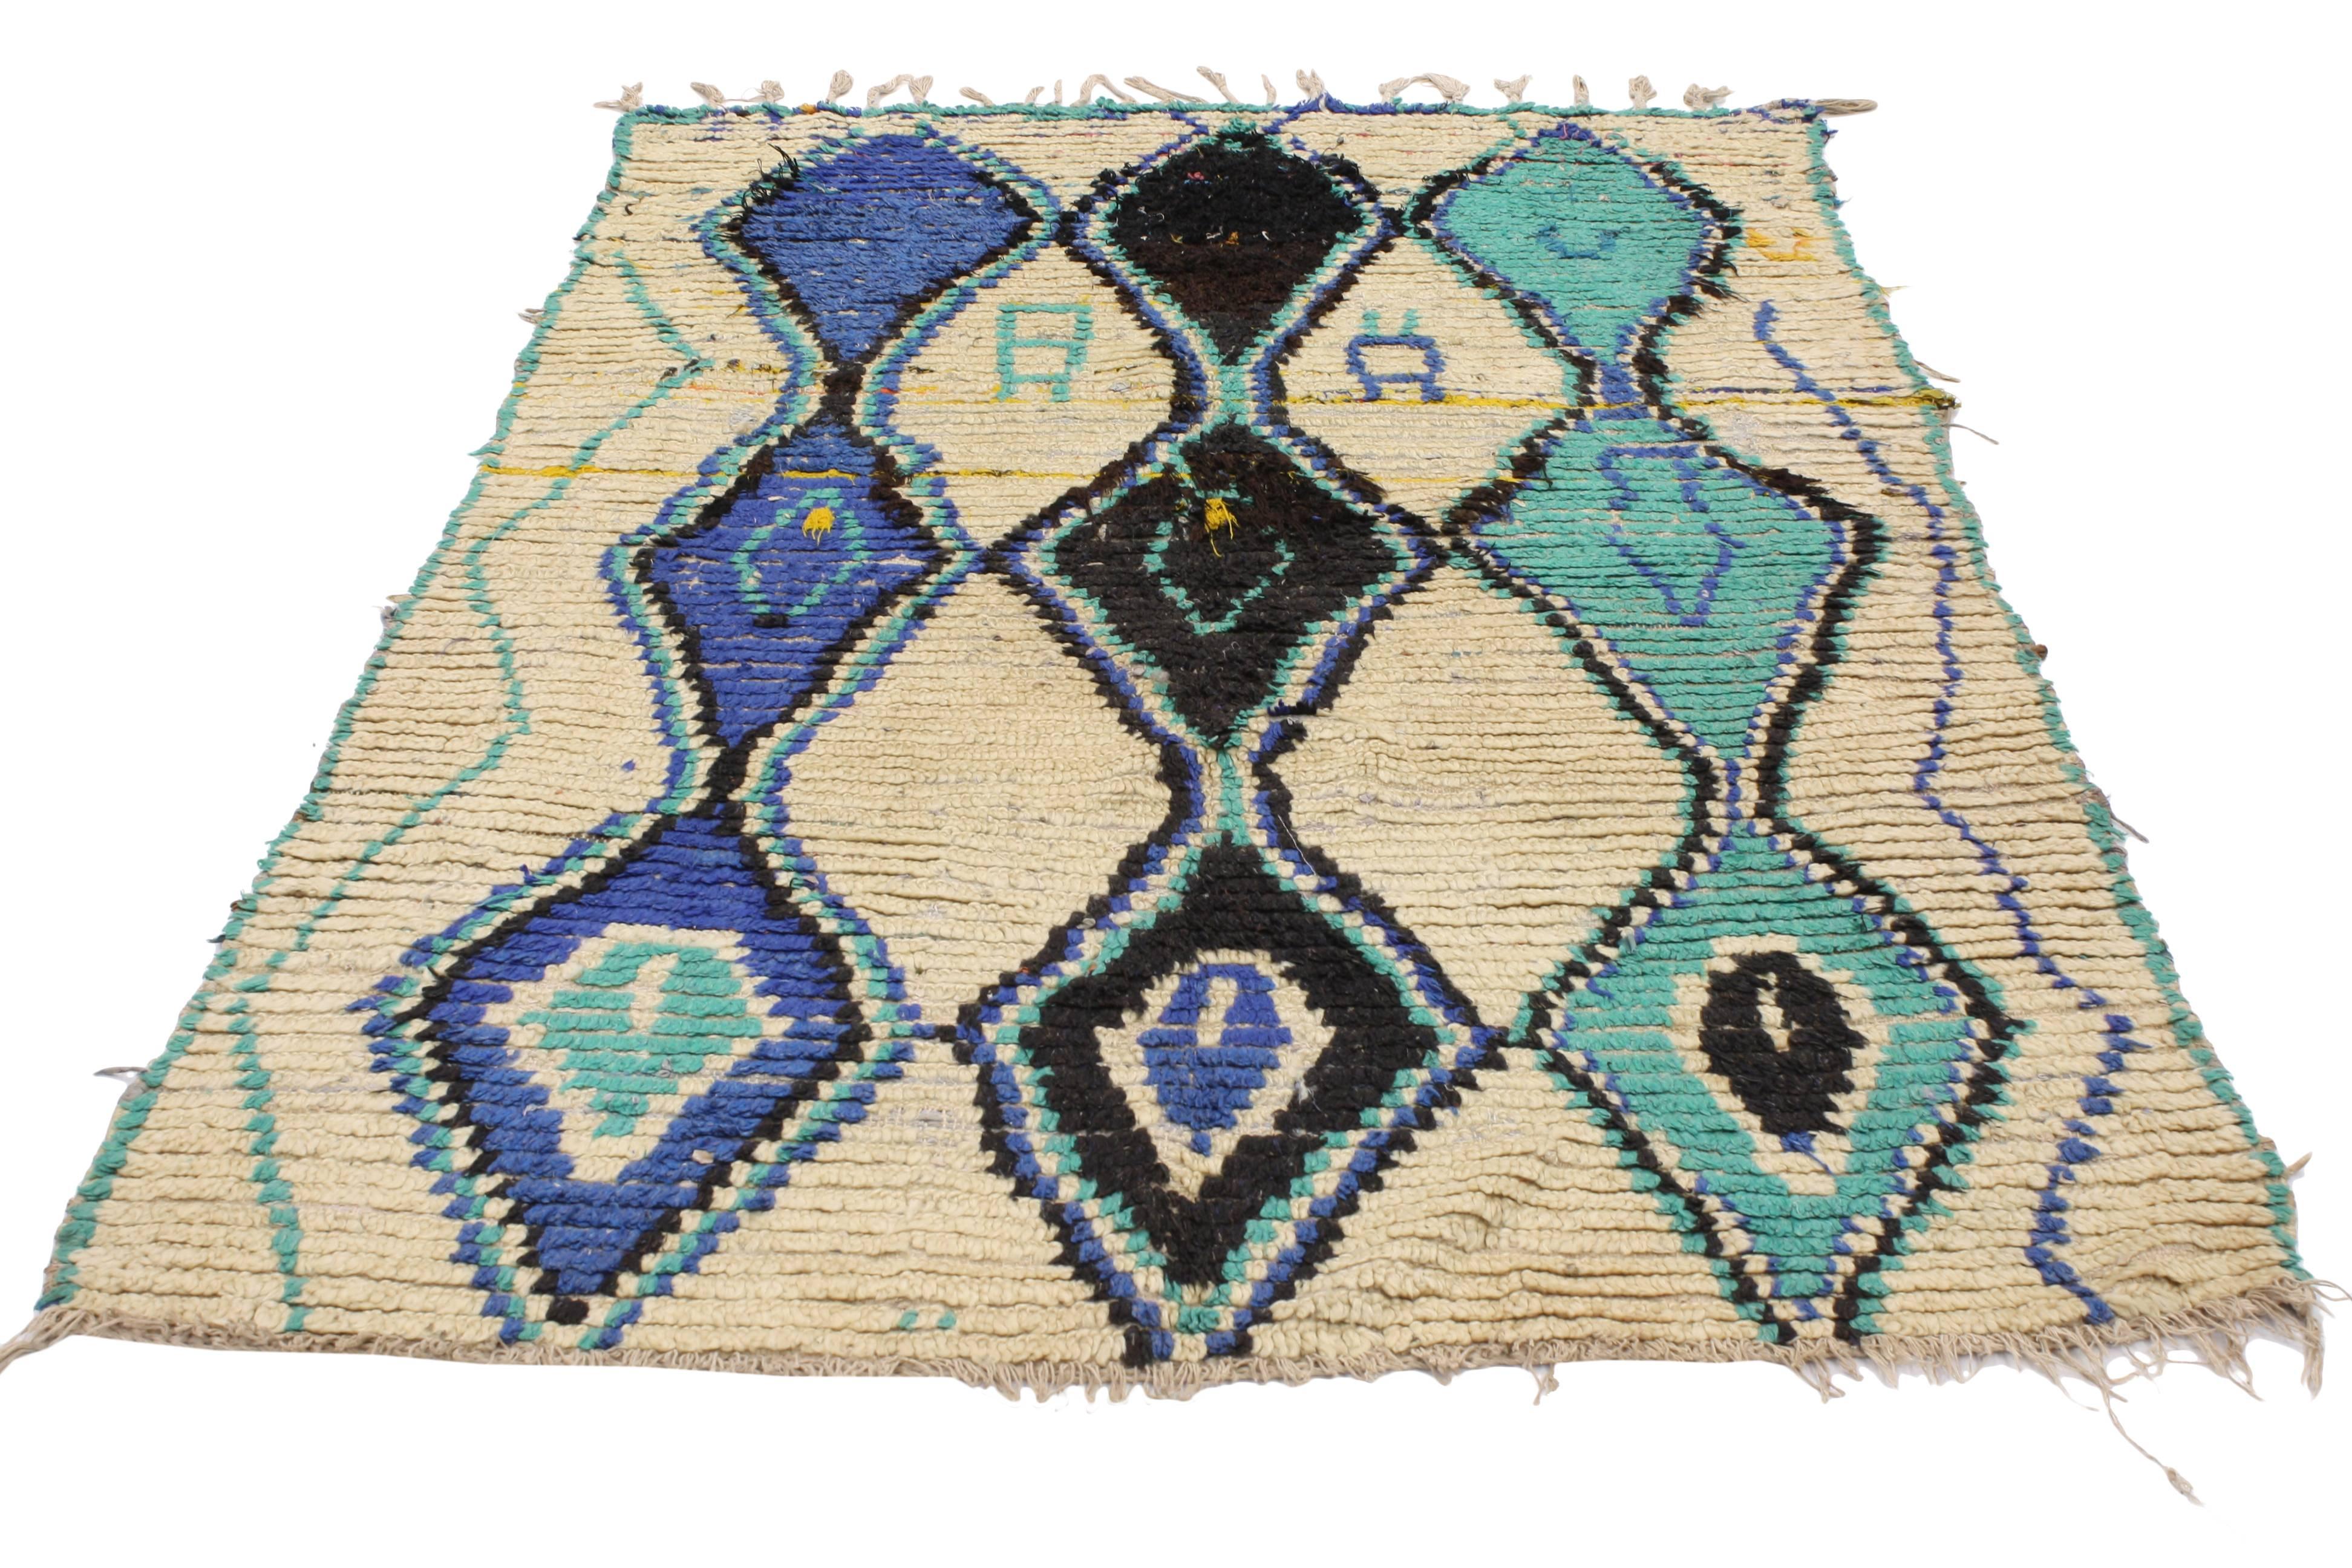 Mid-Century Modern Boho Chic Vintage Berber Moroccan Rug with Modern Tribal Style